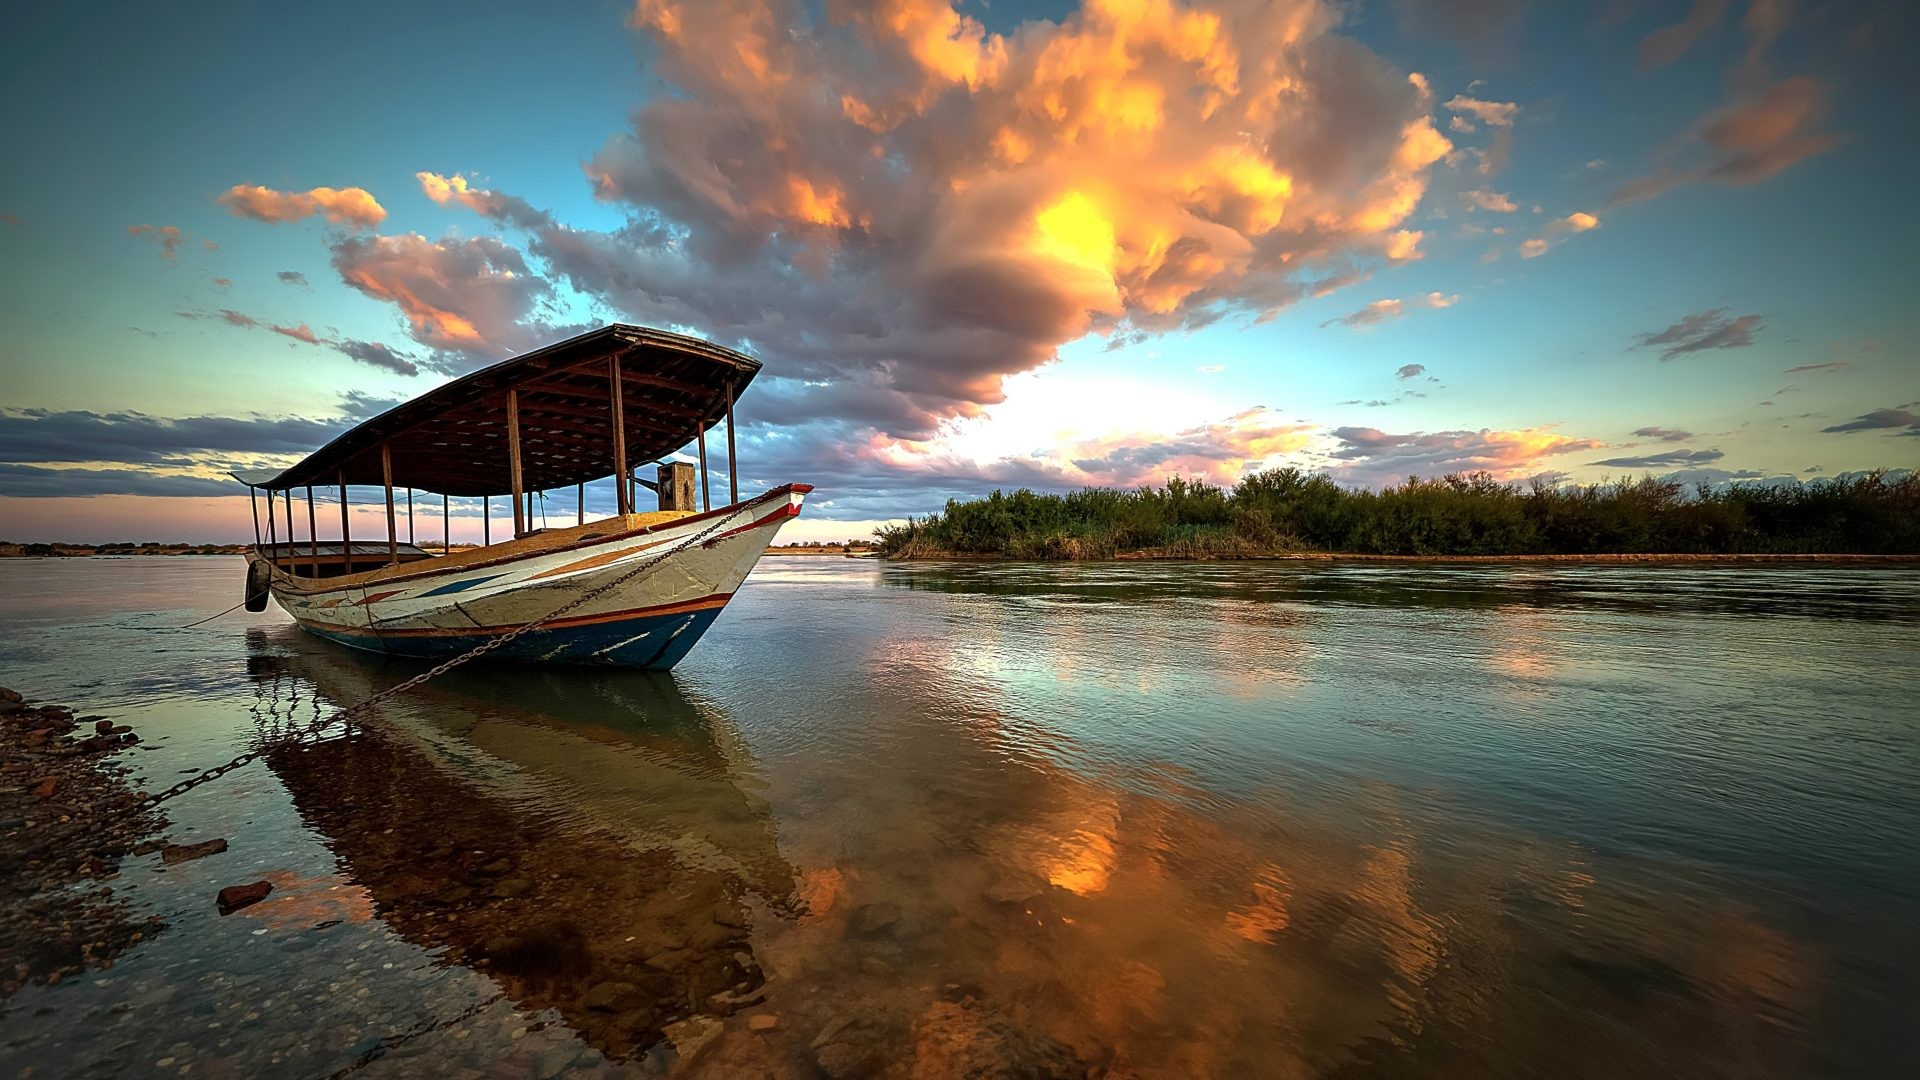 Francisco Tag – Clouds Sky Nature Boats Francisco Rio Brazil Rivers Sao Wallpaper High Resolution for